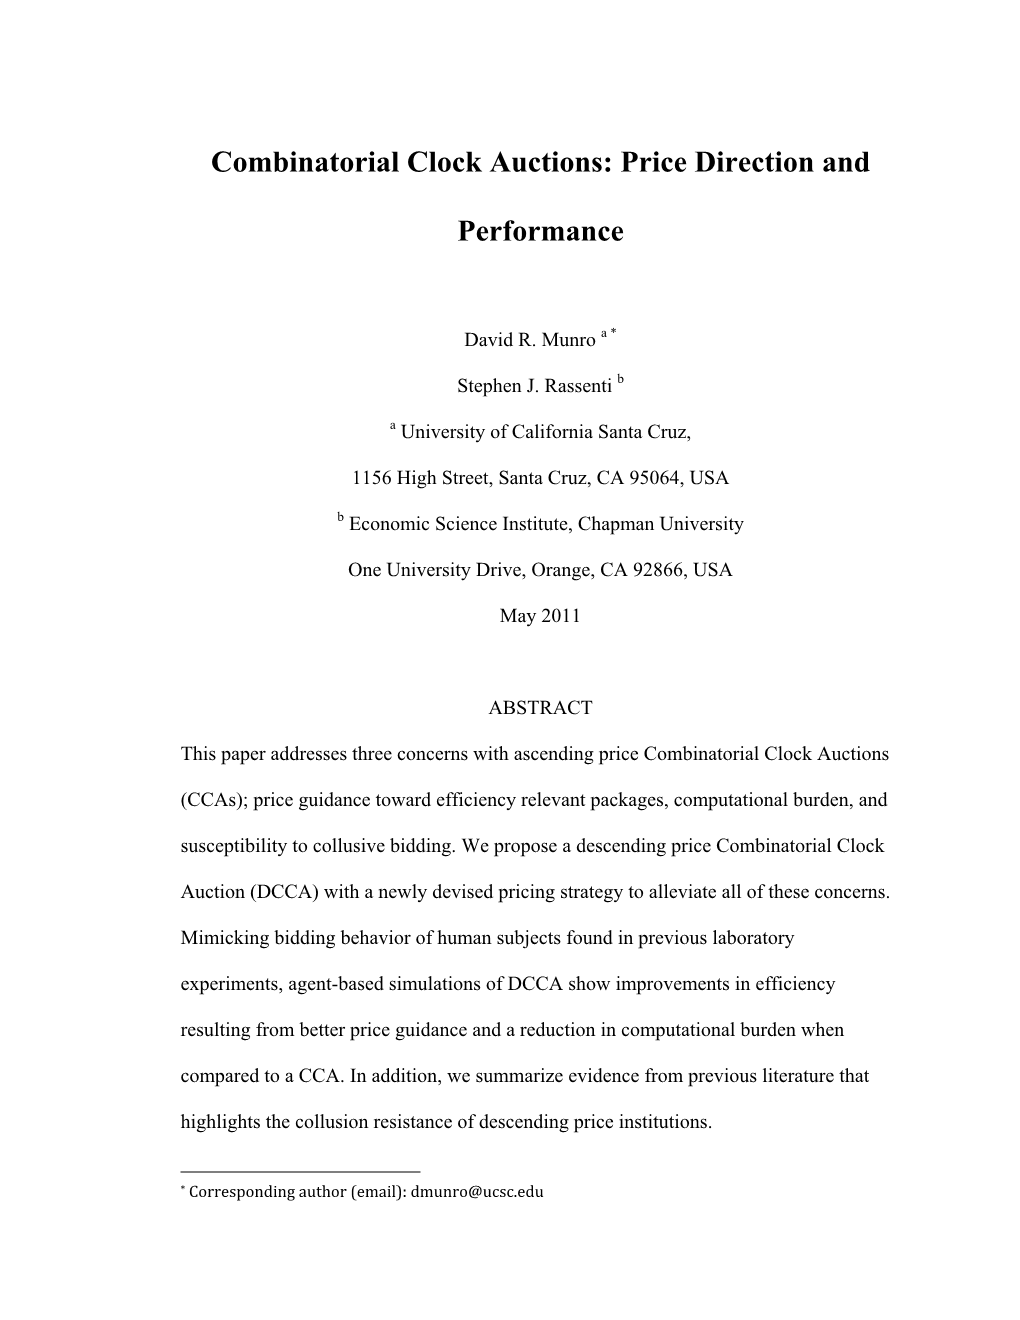 Combinatorial Clock Auctions: Price Direction and Performance